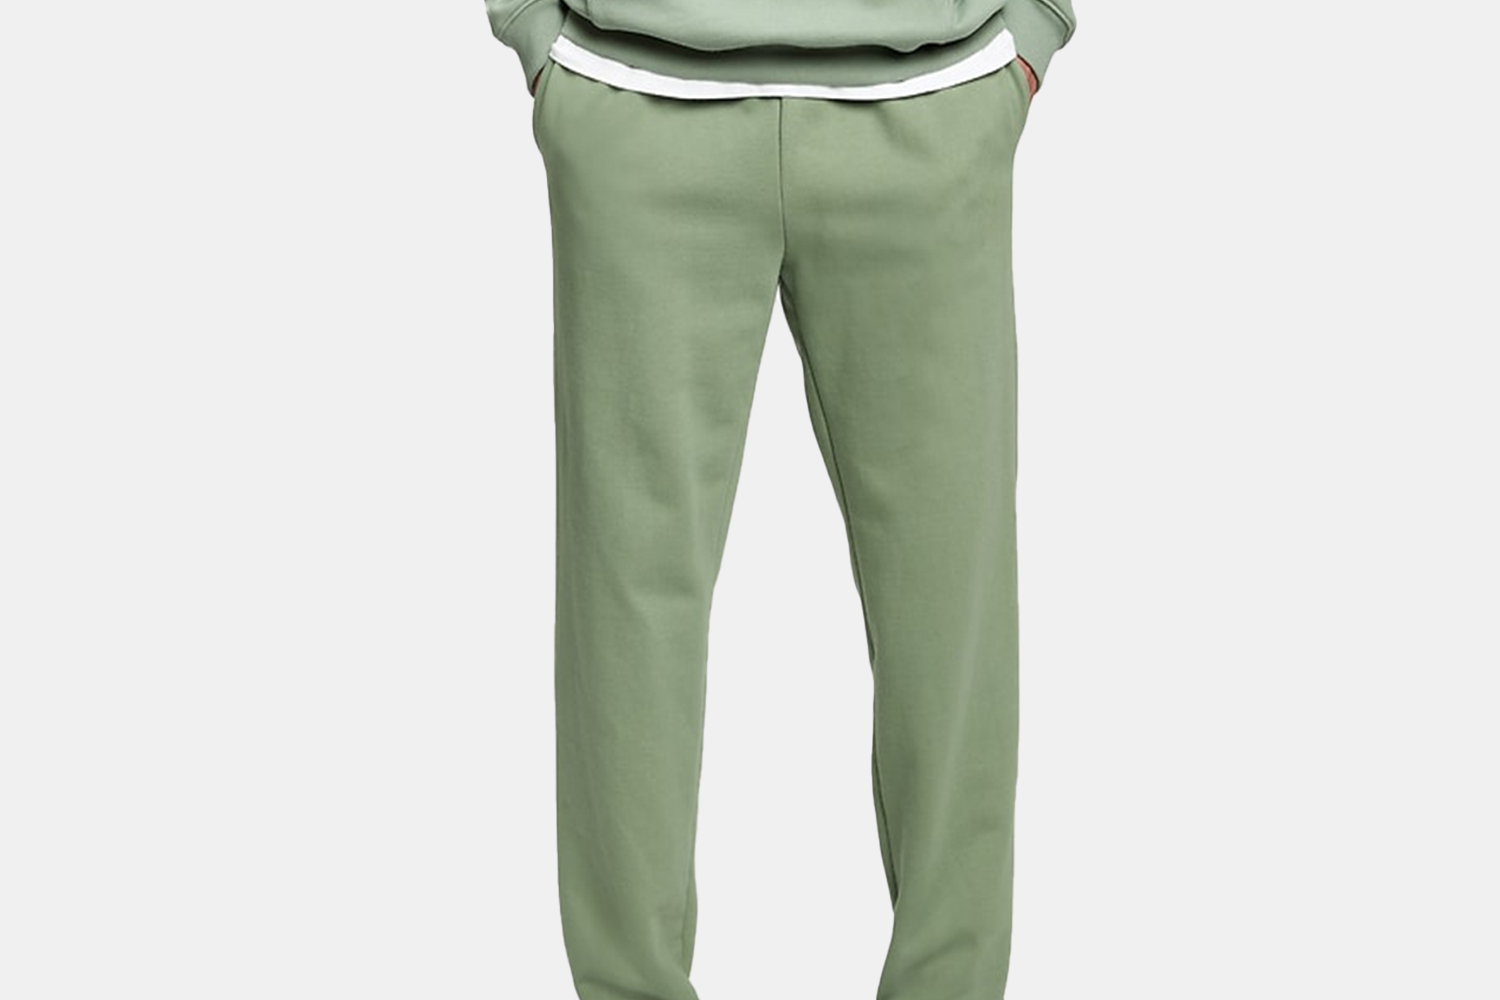 a pair of green sweatpants 